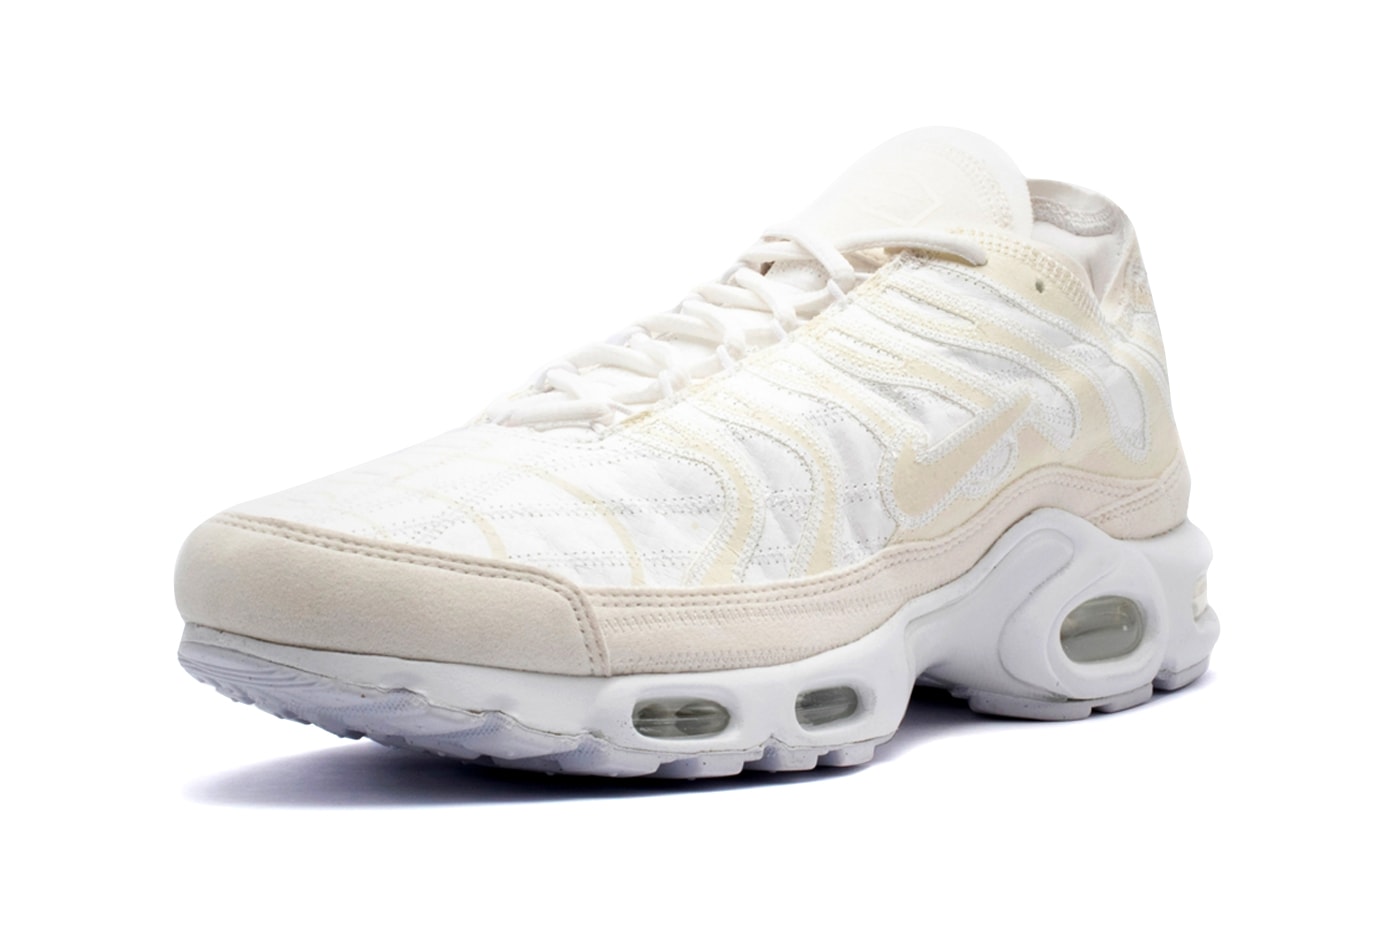 Nike Air Max Plus Deconstructed Beige White top stitching contrast white midsole air sole unit footwear sneaker tn check swoosh exposed upper